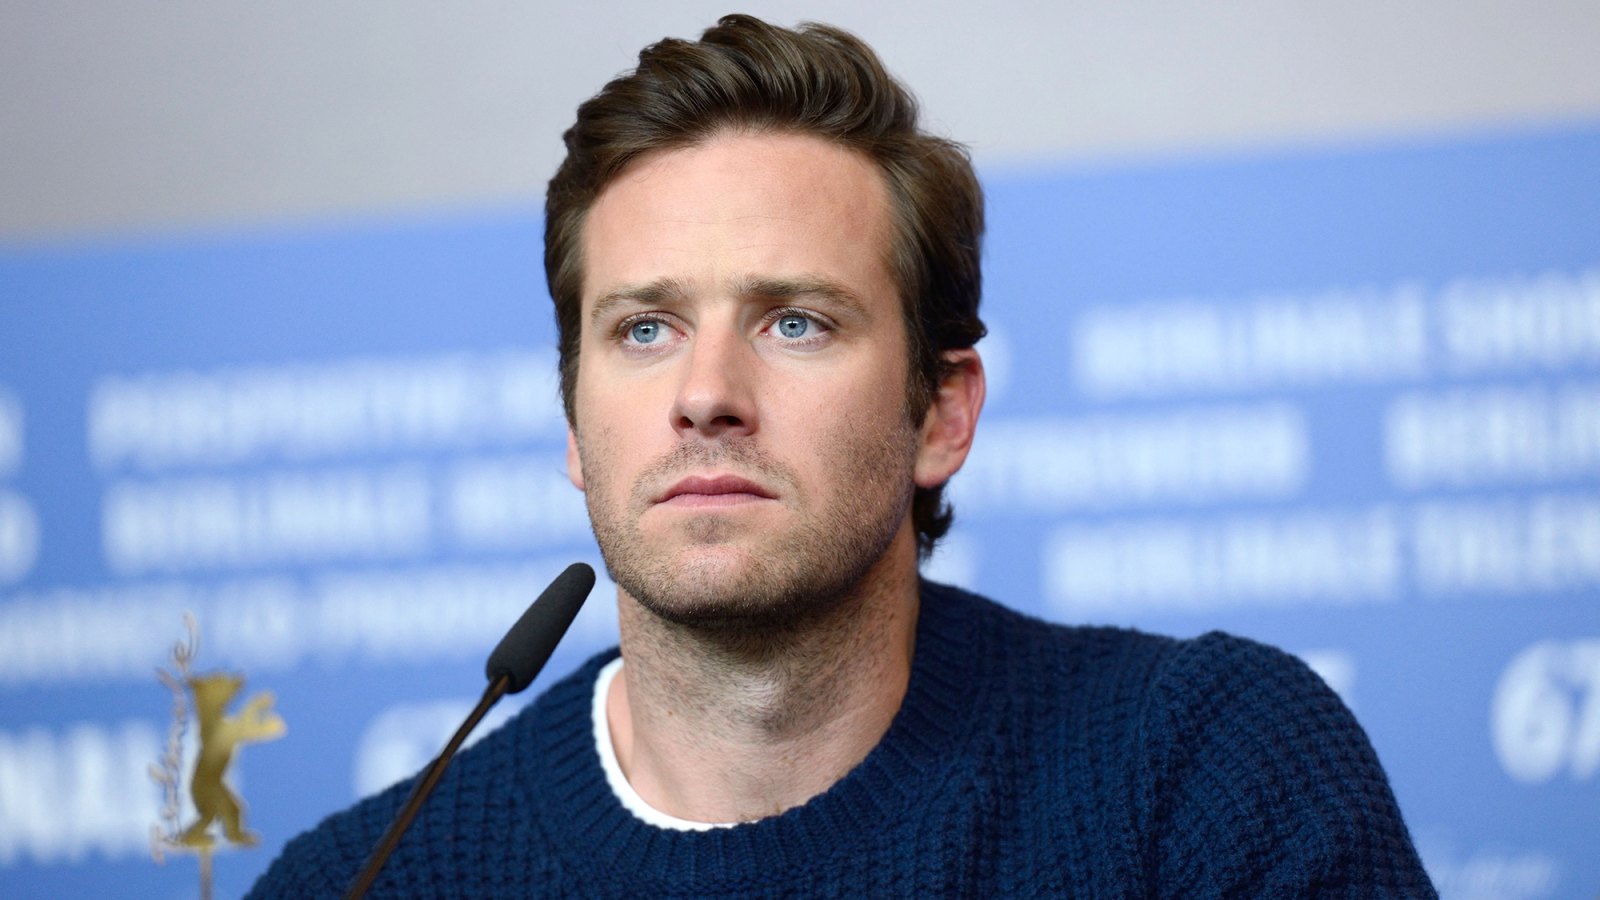 Armie Hammer Breaks Silence After Sexual Assault Claims, NSFW Fantasies: 'Here to Own My Mistakes'